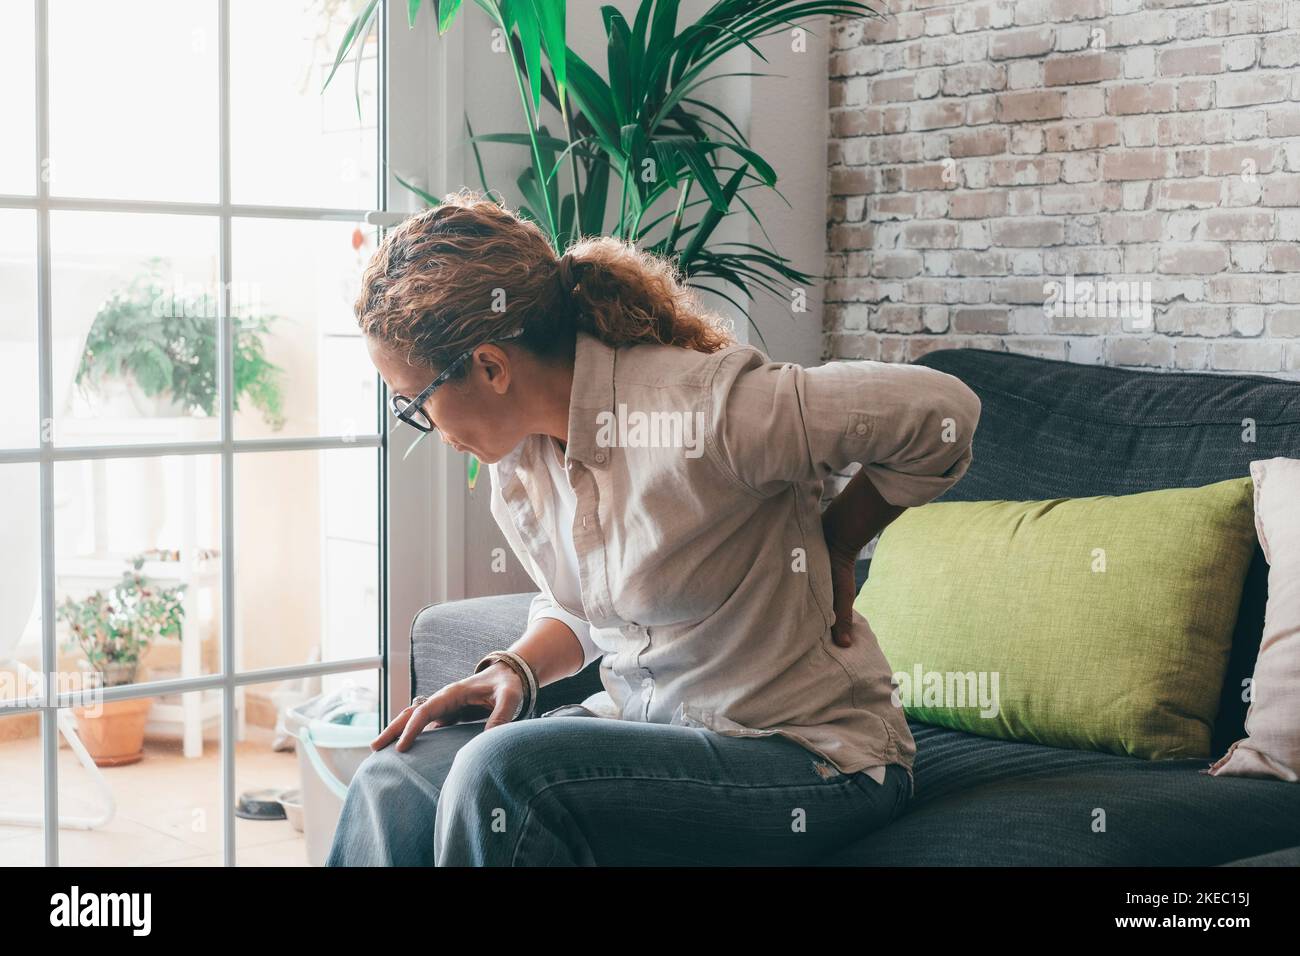 Unhealthy curly woman sit on couch at home stretching suffering from back problems, unwell overworked female touch massage lower spine, having muscular pain or strain. Incorrect posture concept Stock Photo